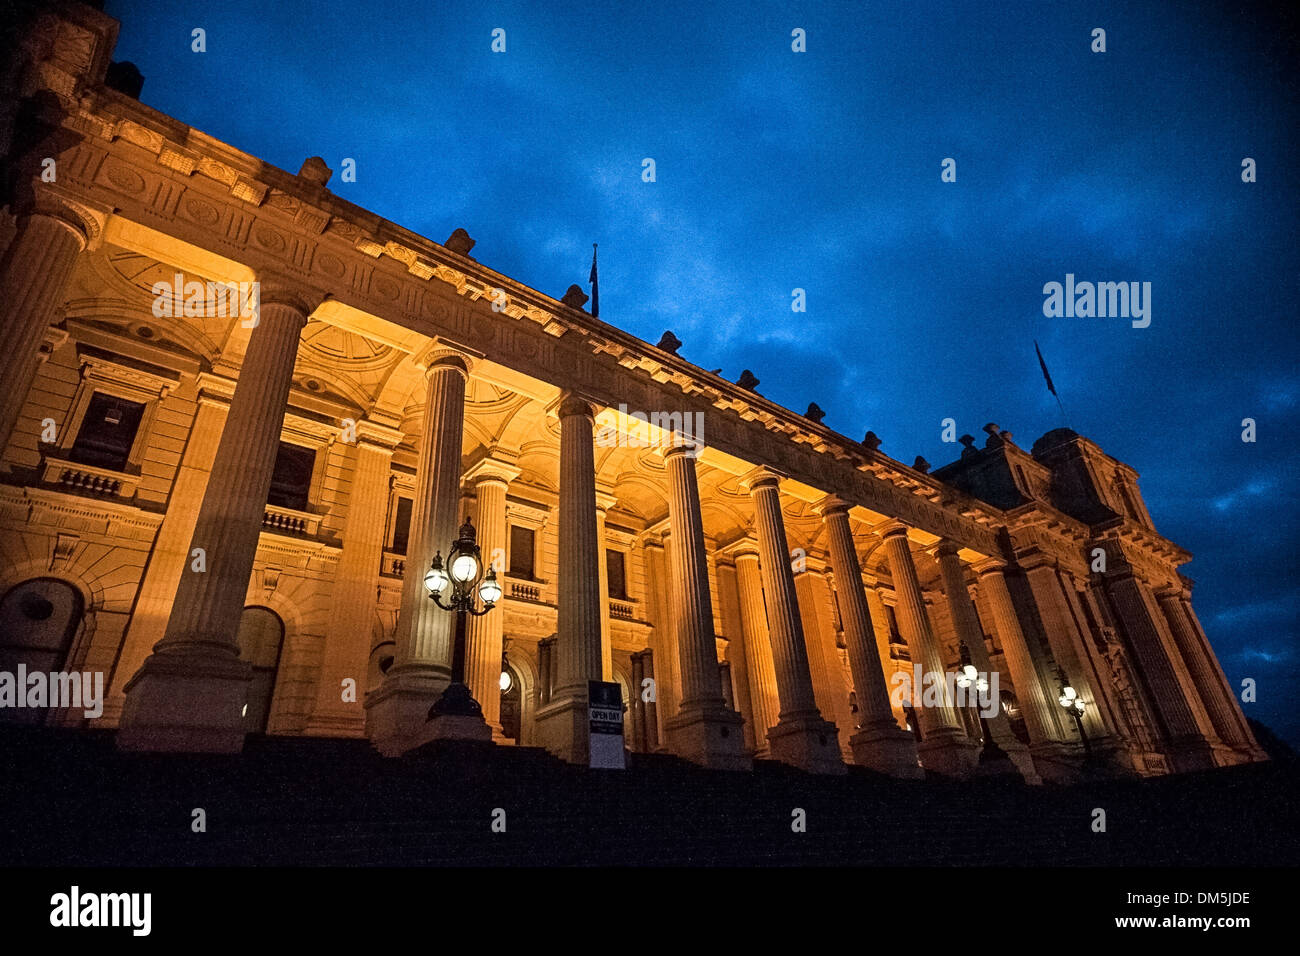 The elegant State parliament of Victoria at night, Australia where politicians and people's representatives debate and pass laws Stock Photo